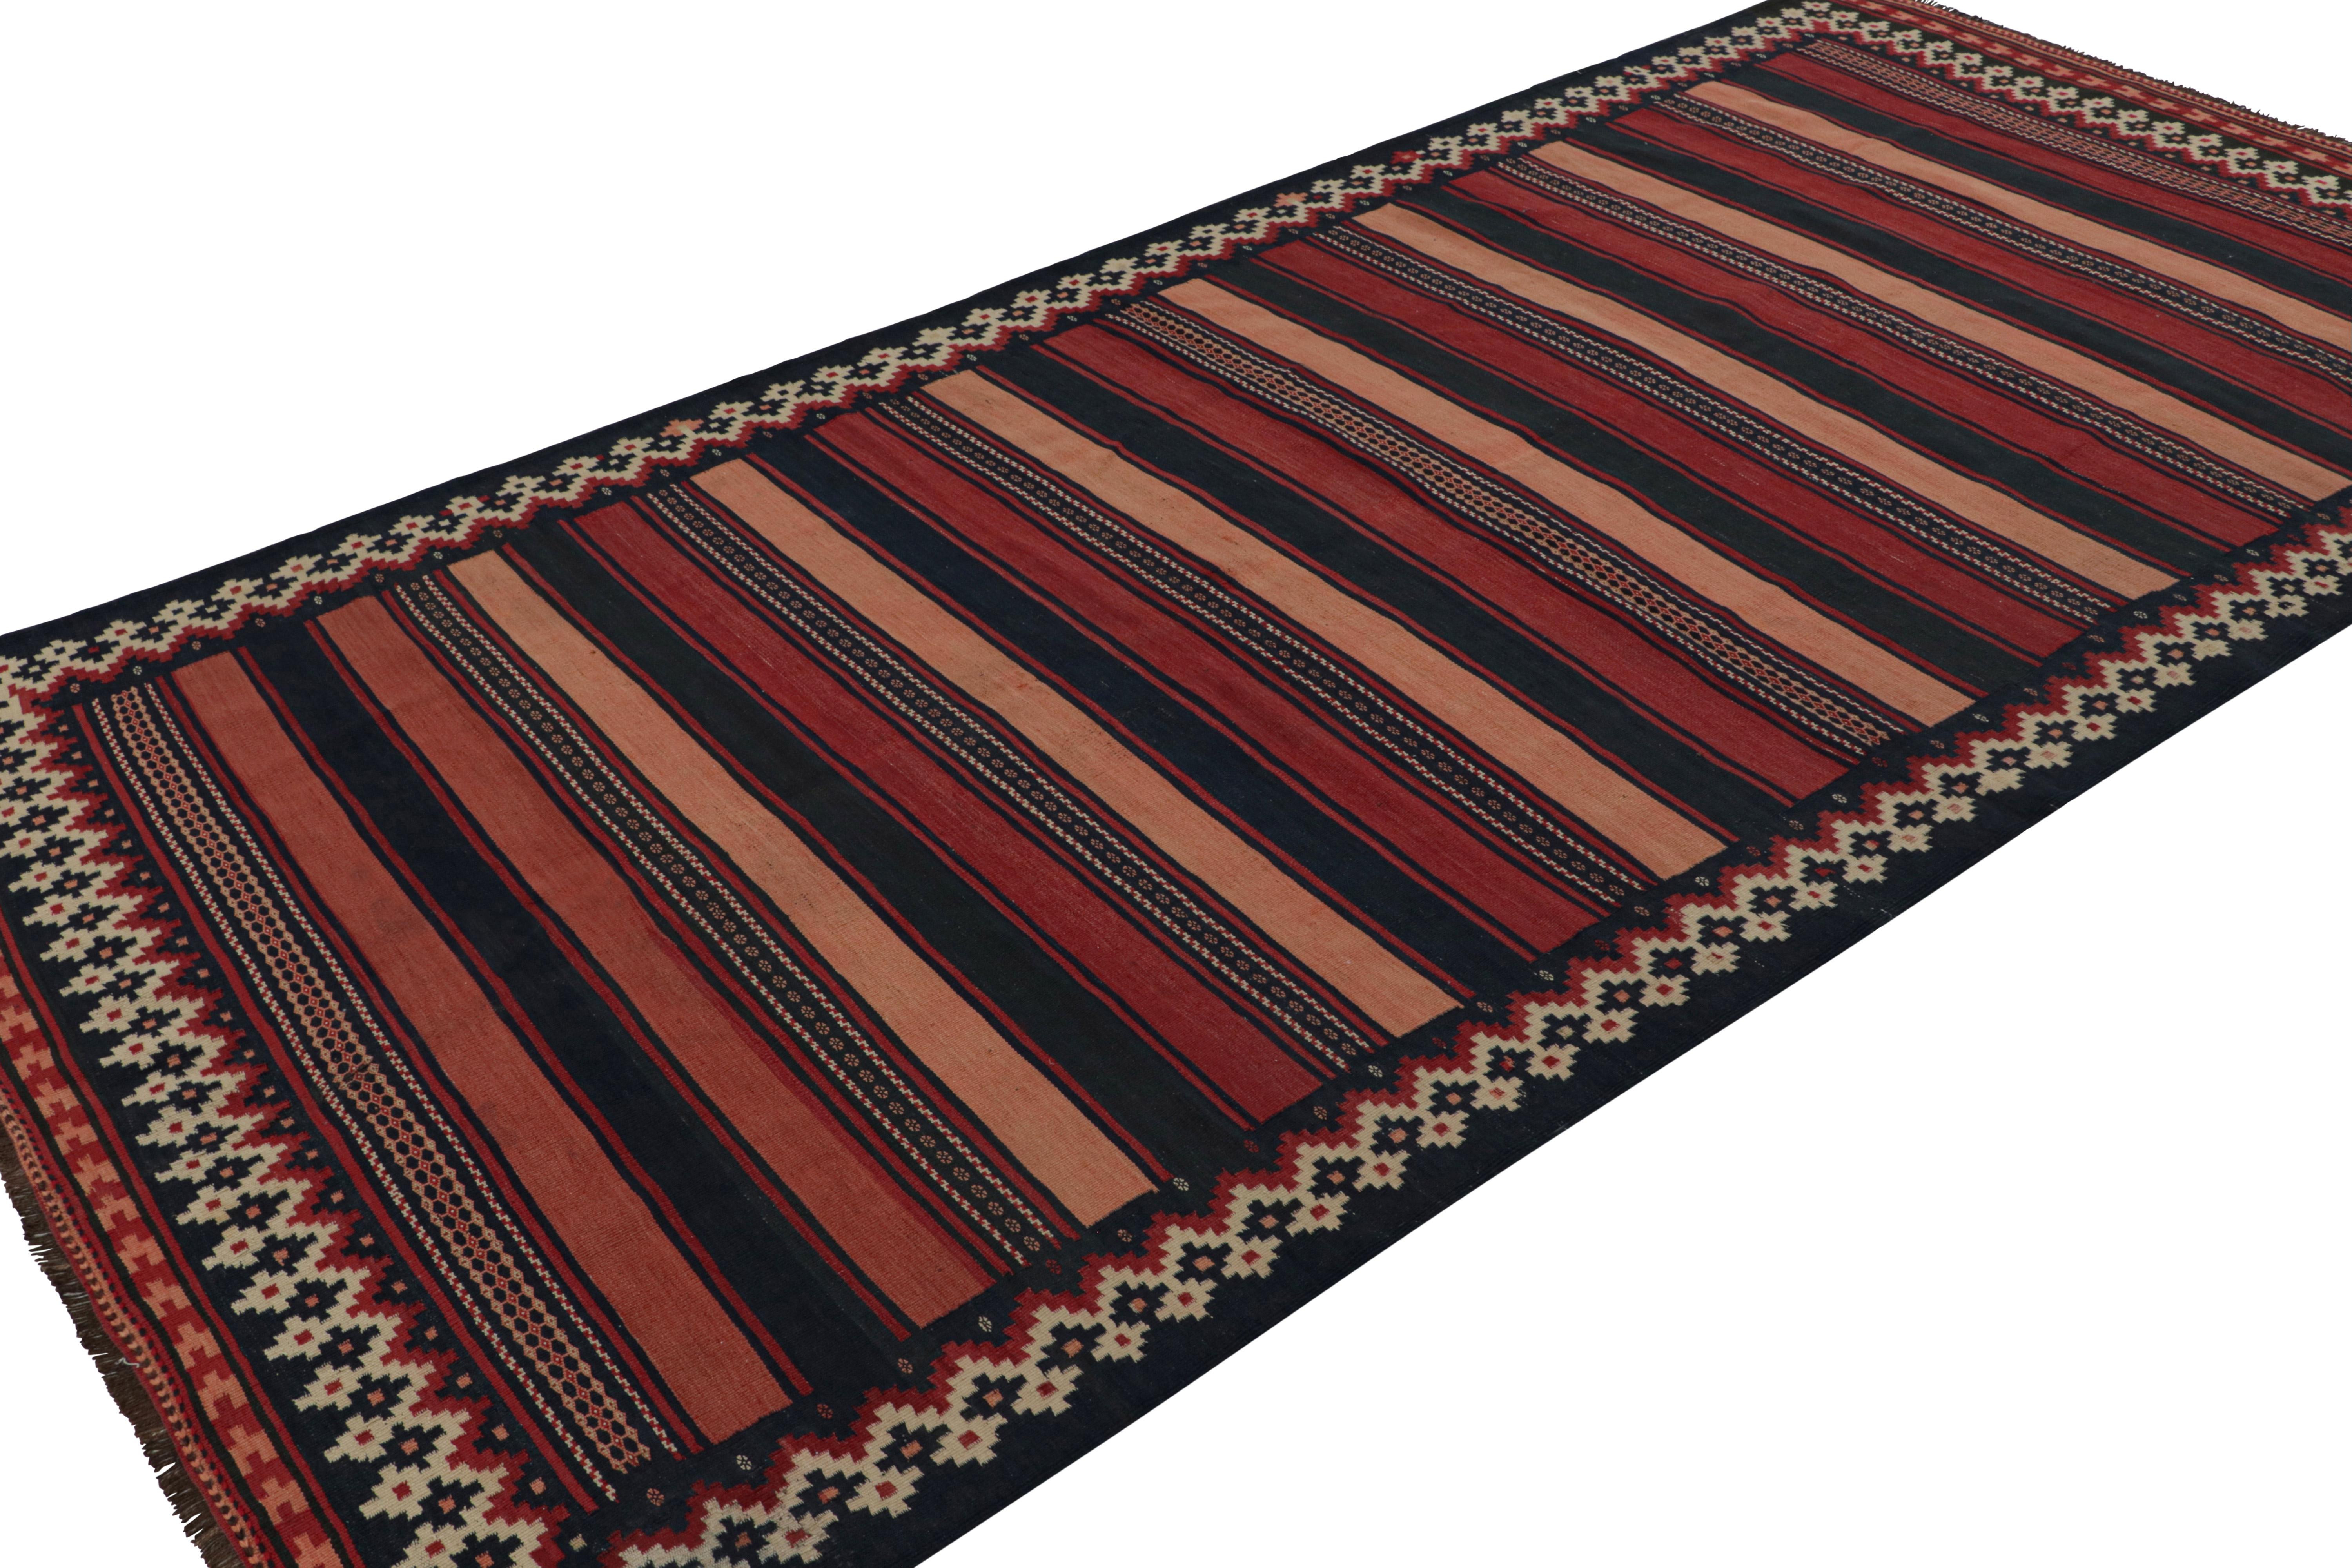 Handwoven in wool, circa 1950-1960, this 5x10 vintage Afghan tribal kilim, in hues of red, pink, black and beige/brown, features fencepost geometric patterns across the entire field. 

On the Design: 

As an exciting new curation in Rug & Kilim